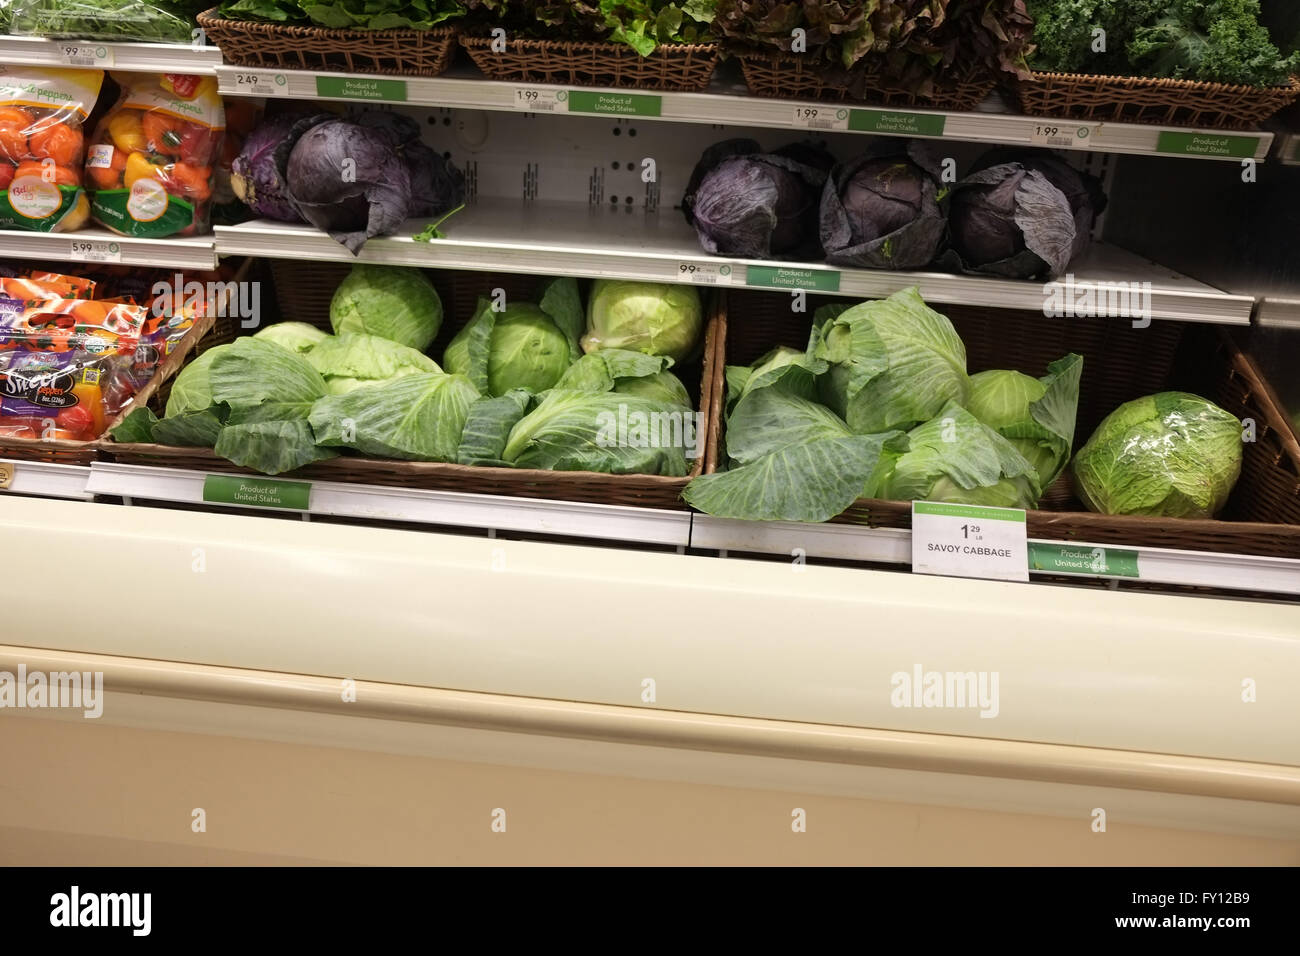 Fresh produce on display in a Florida supermarket, April 2016 Stock Photo